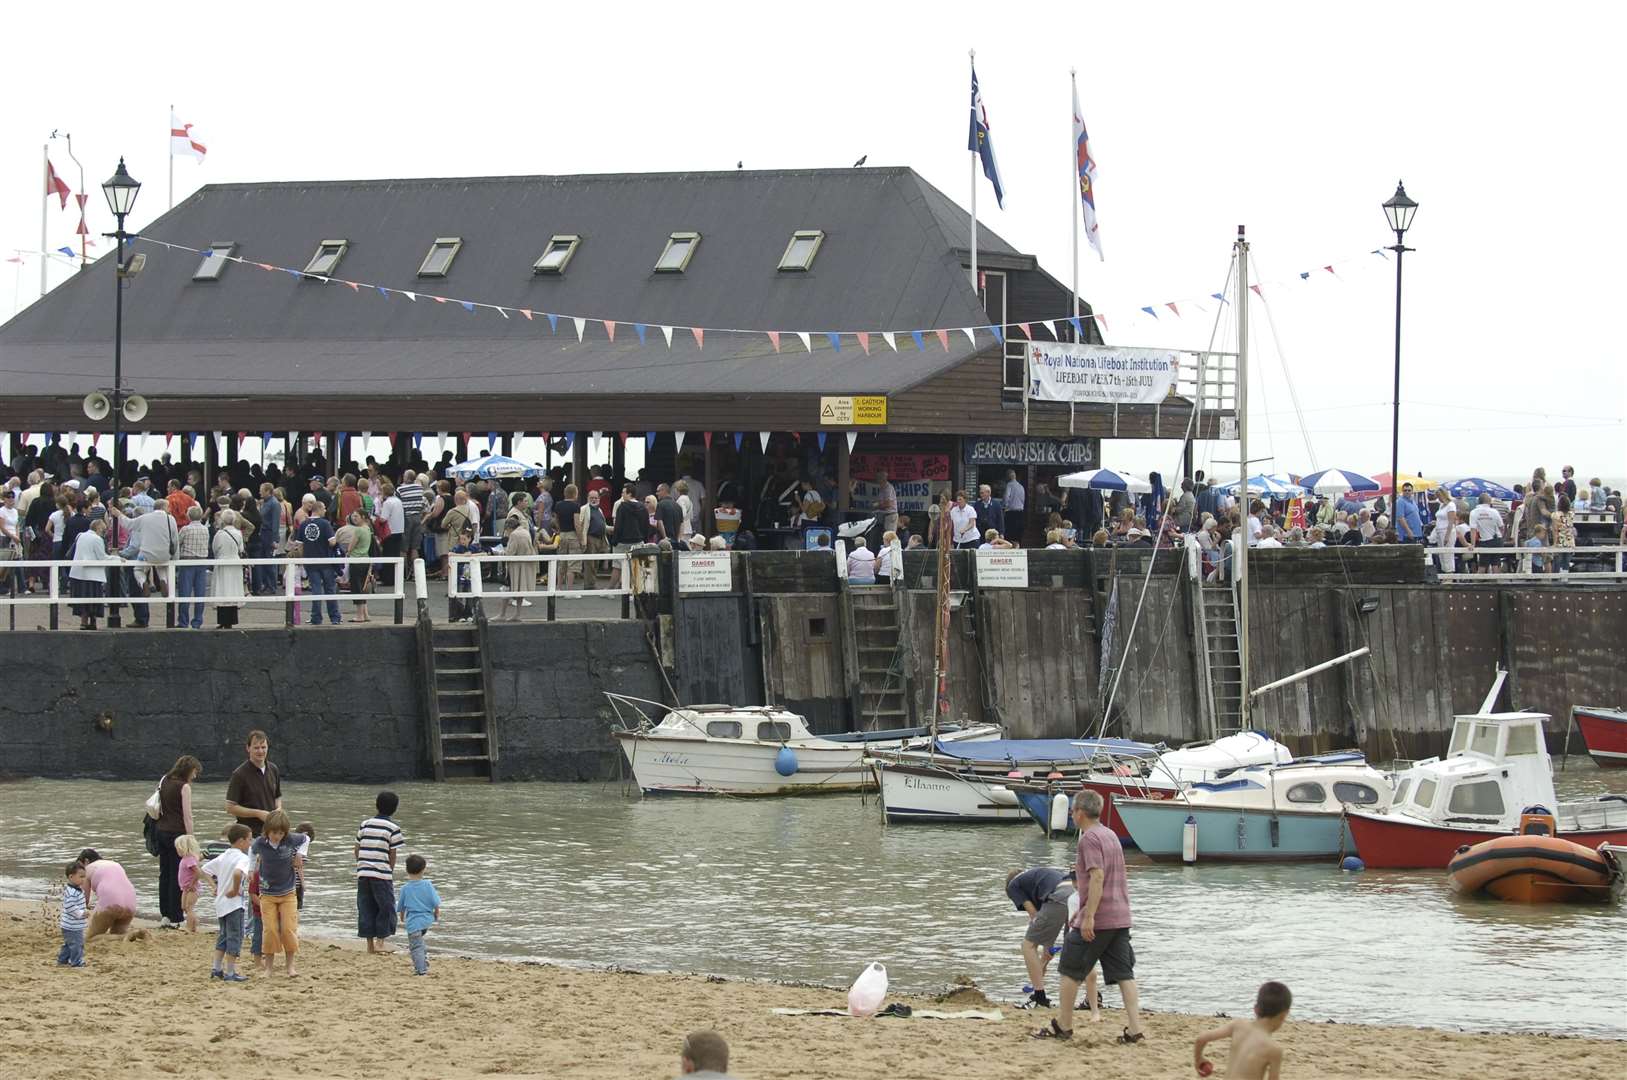 Broadstairs Pier during a Sunday Service led by the Royal Marines Band and attended by hundreds of people in 2007. Picture: Matt McArdle